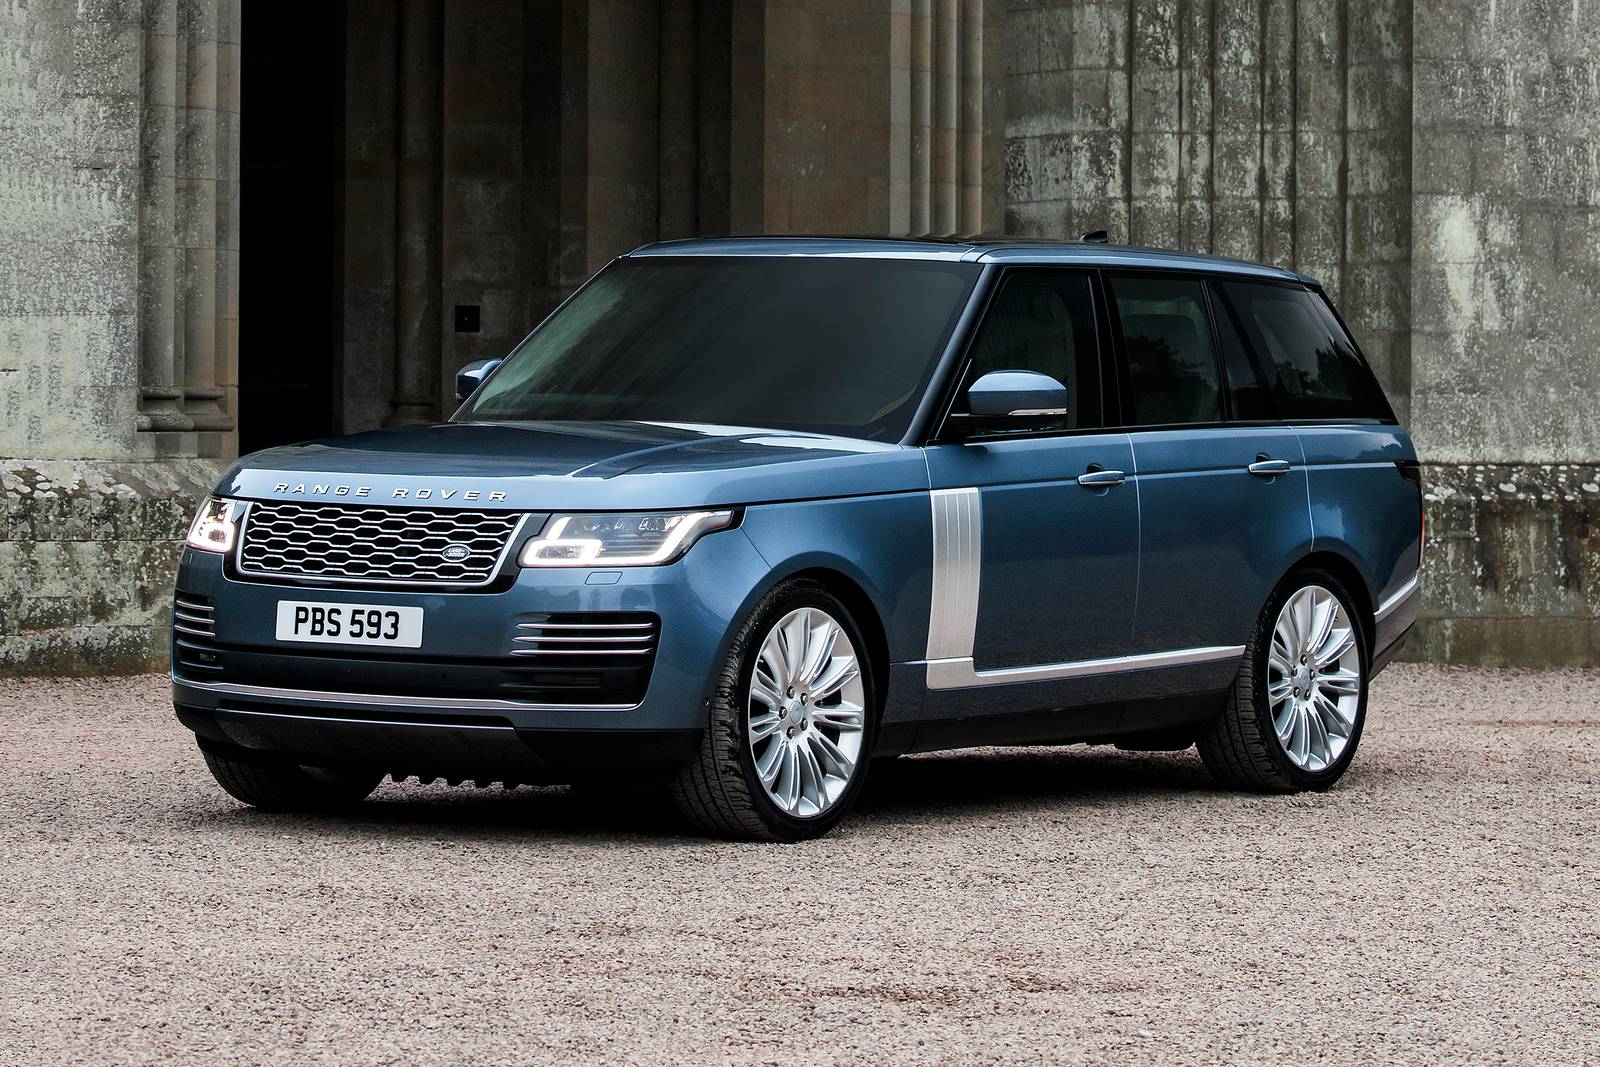 Range Rover Transmission Cost  : The Range Rover Introduces The Phev Powertrain, Using A Combination Of Electric Motor And Combustion Engine.